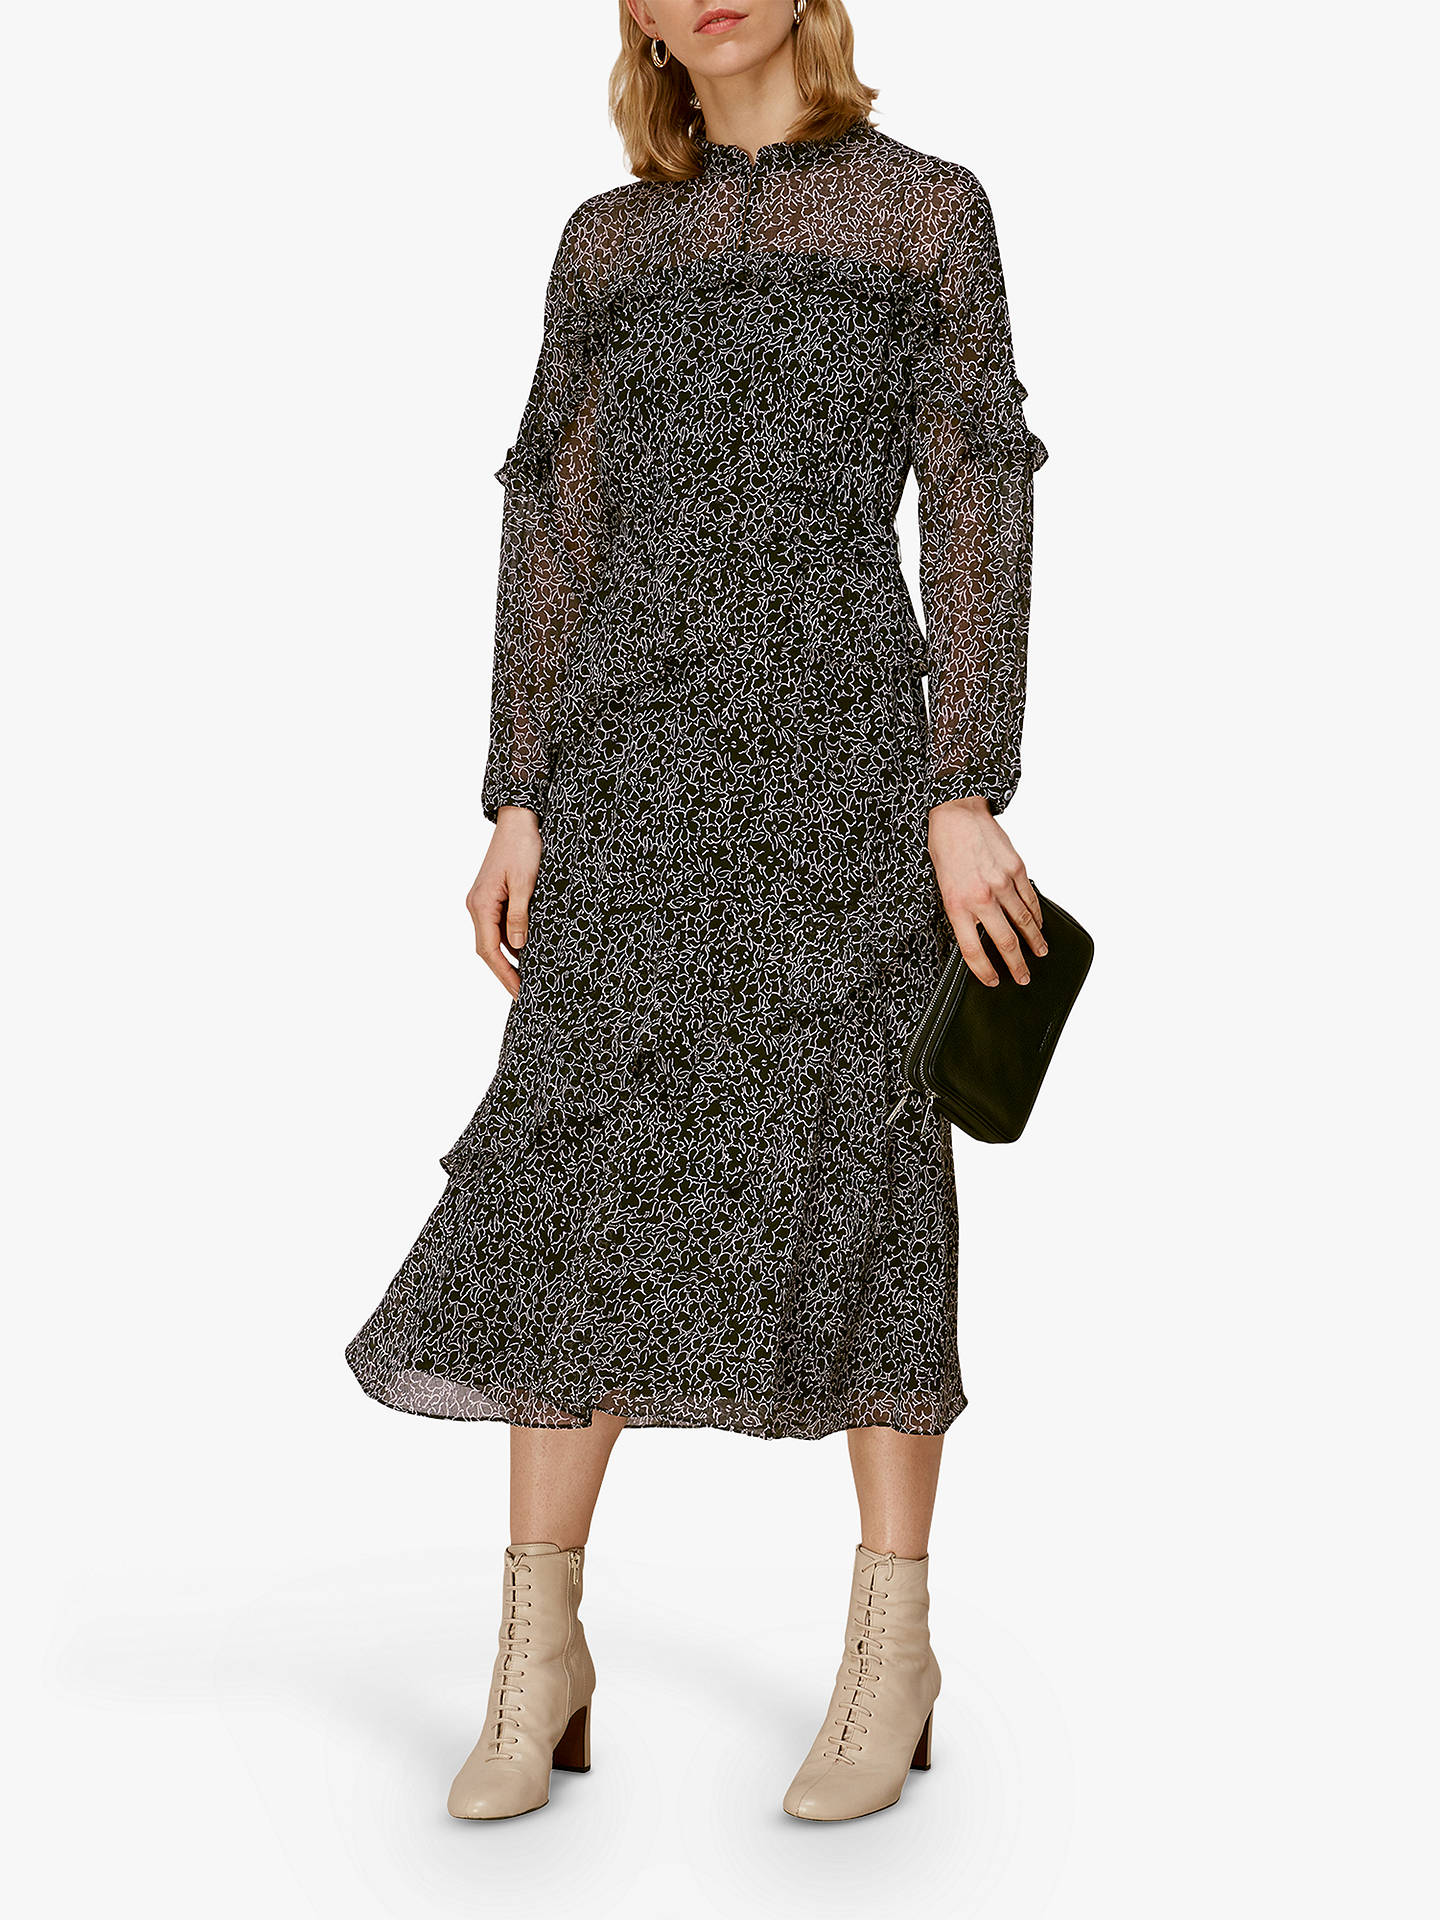 Whistles Macy Sketched Floral Midi Dress at John Lewis & Partners